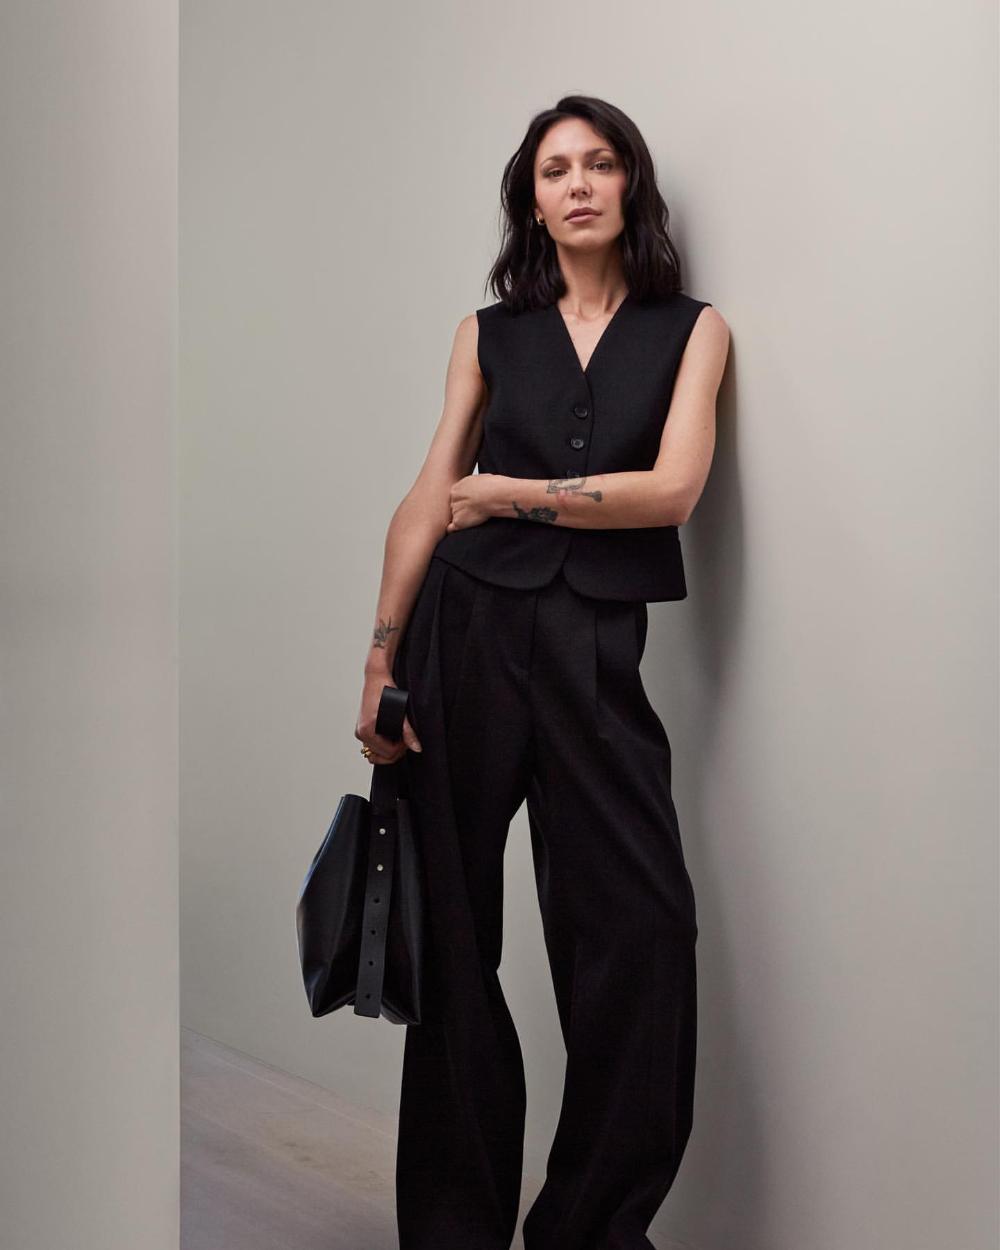 Petra Mackova Minimalist Outfits COS Black Tailored Vest and Trousers, COS Black Tote Bag